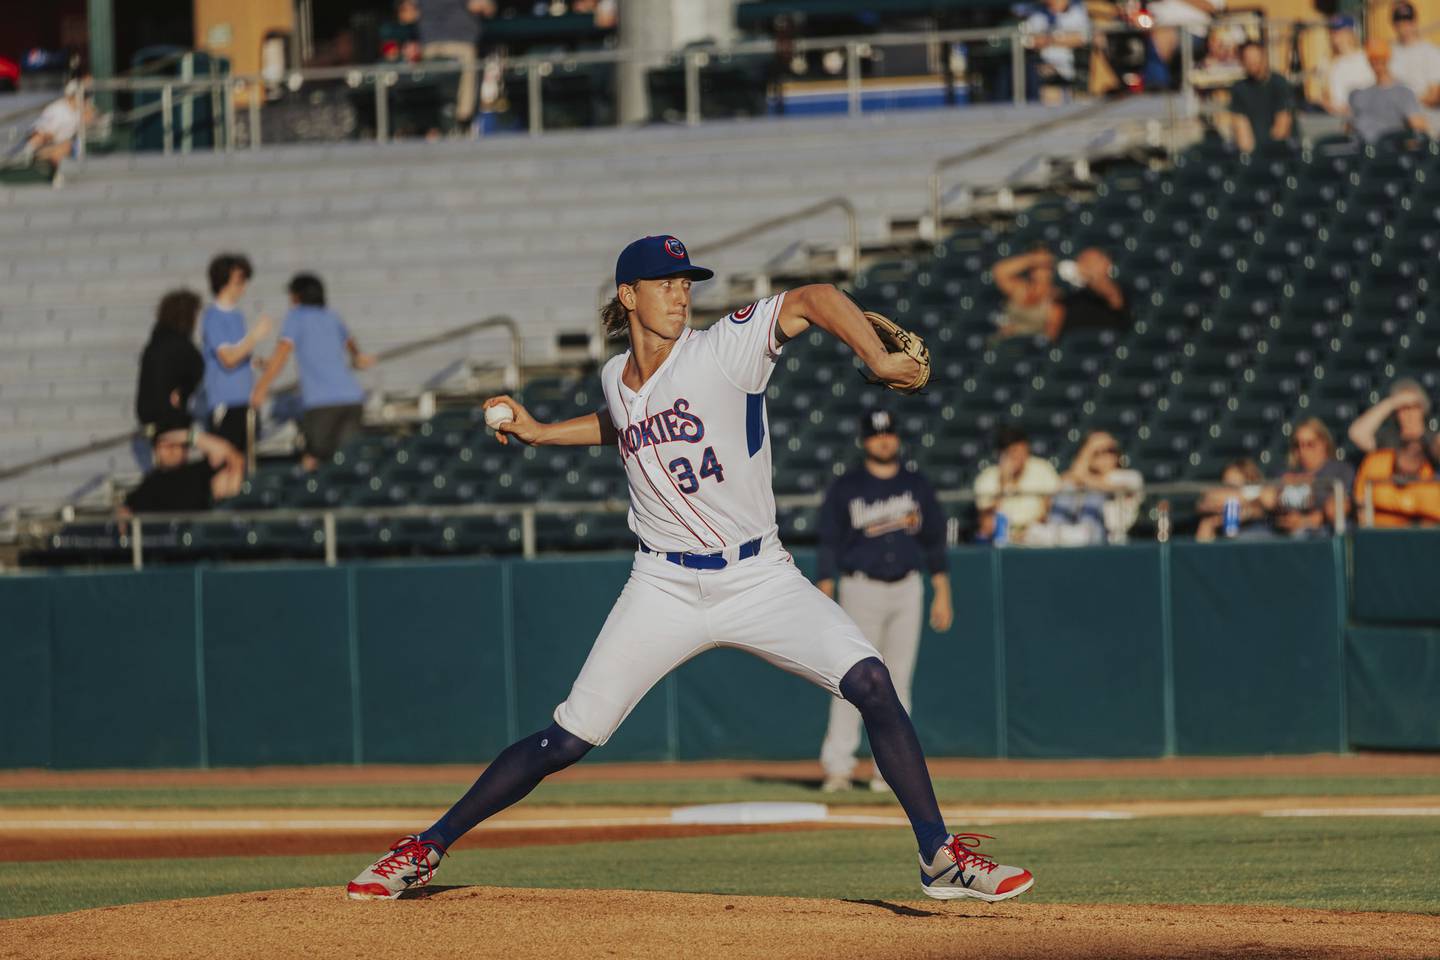 Cubs prospect Ben Brown pitches during a Double A game for the Tennessee Smokies on Aug. 12, 2022, against the Mississippi Braves in Kodak, Tenn.